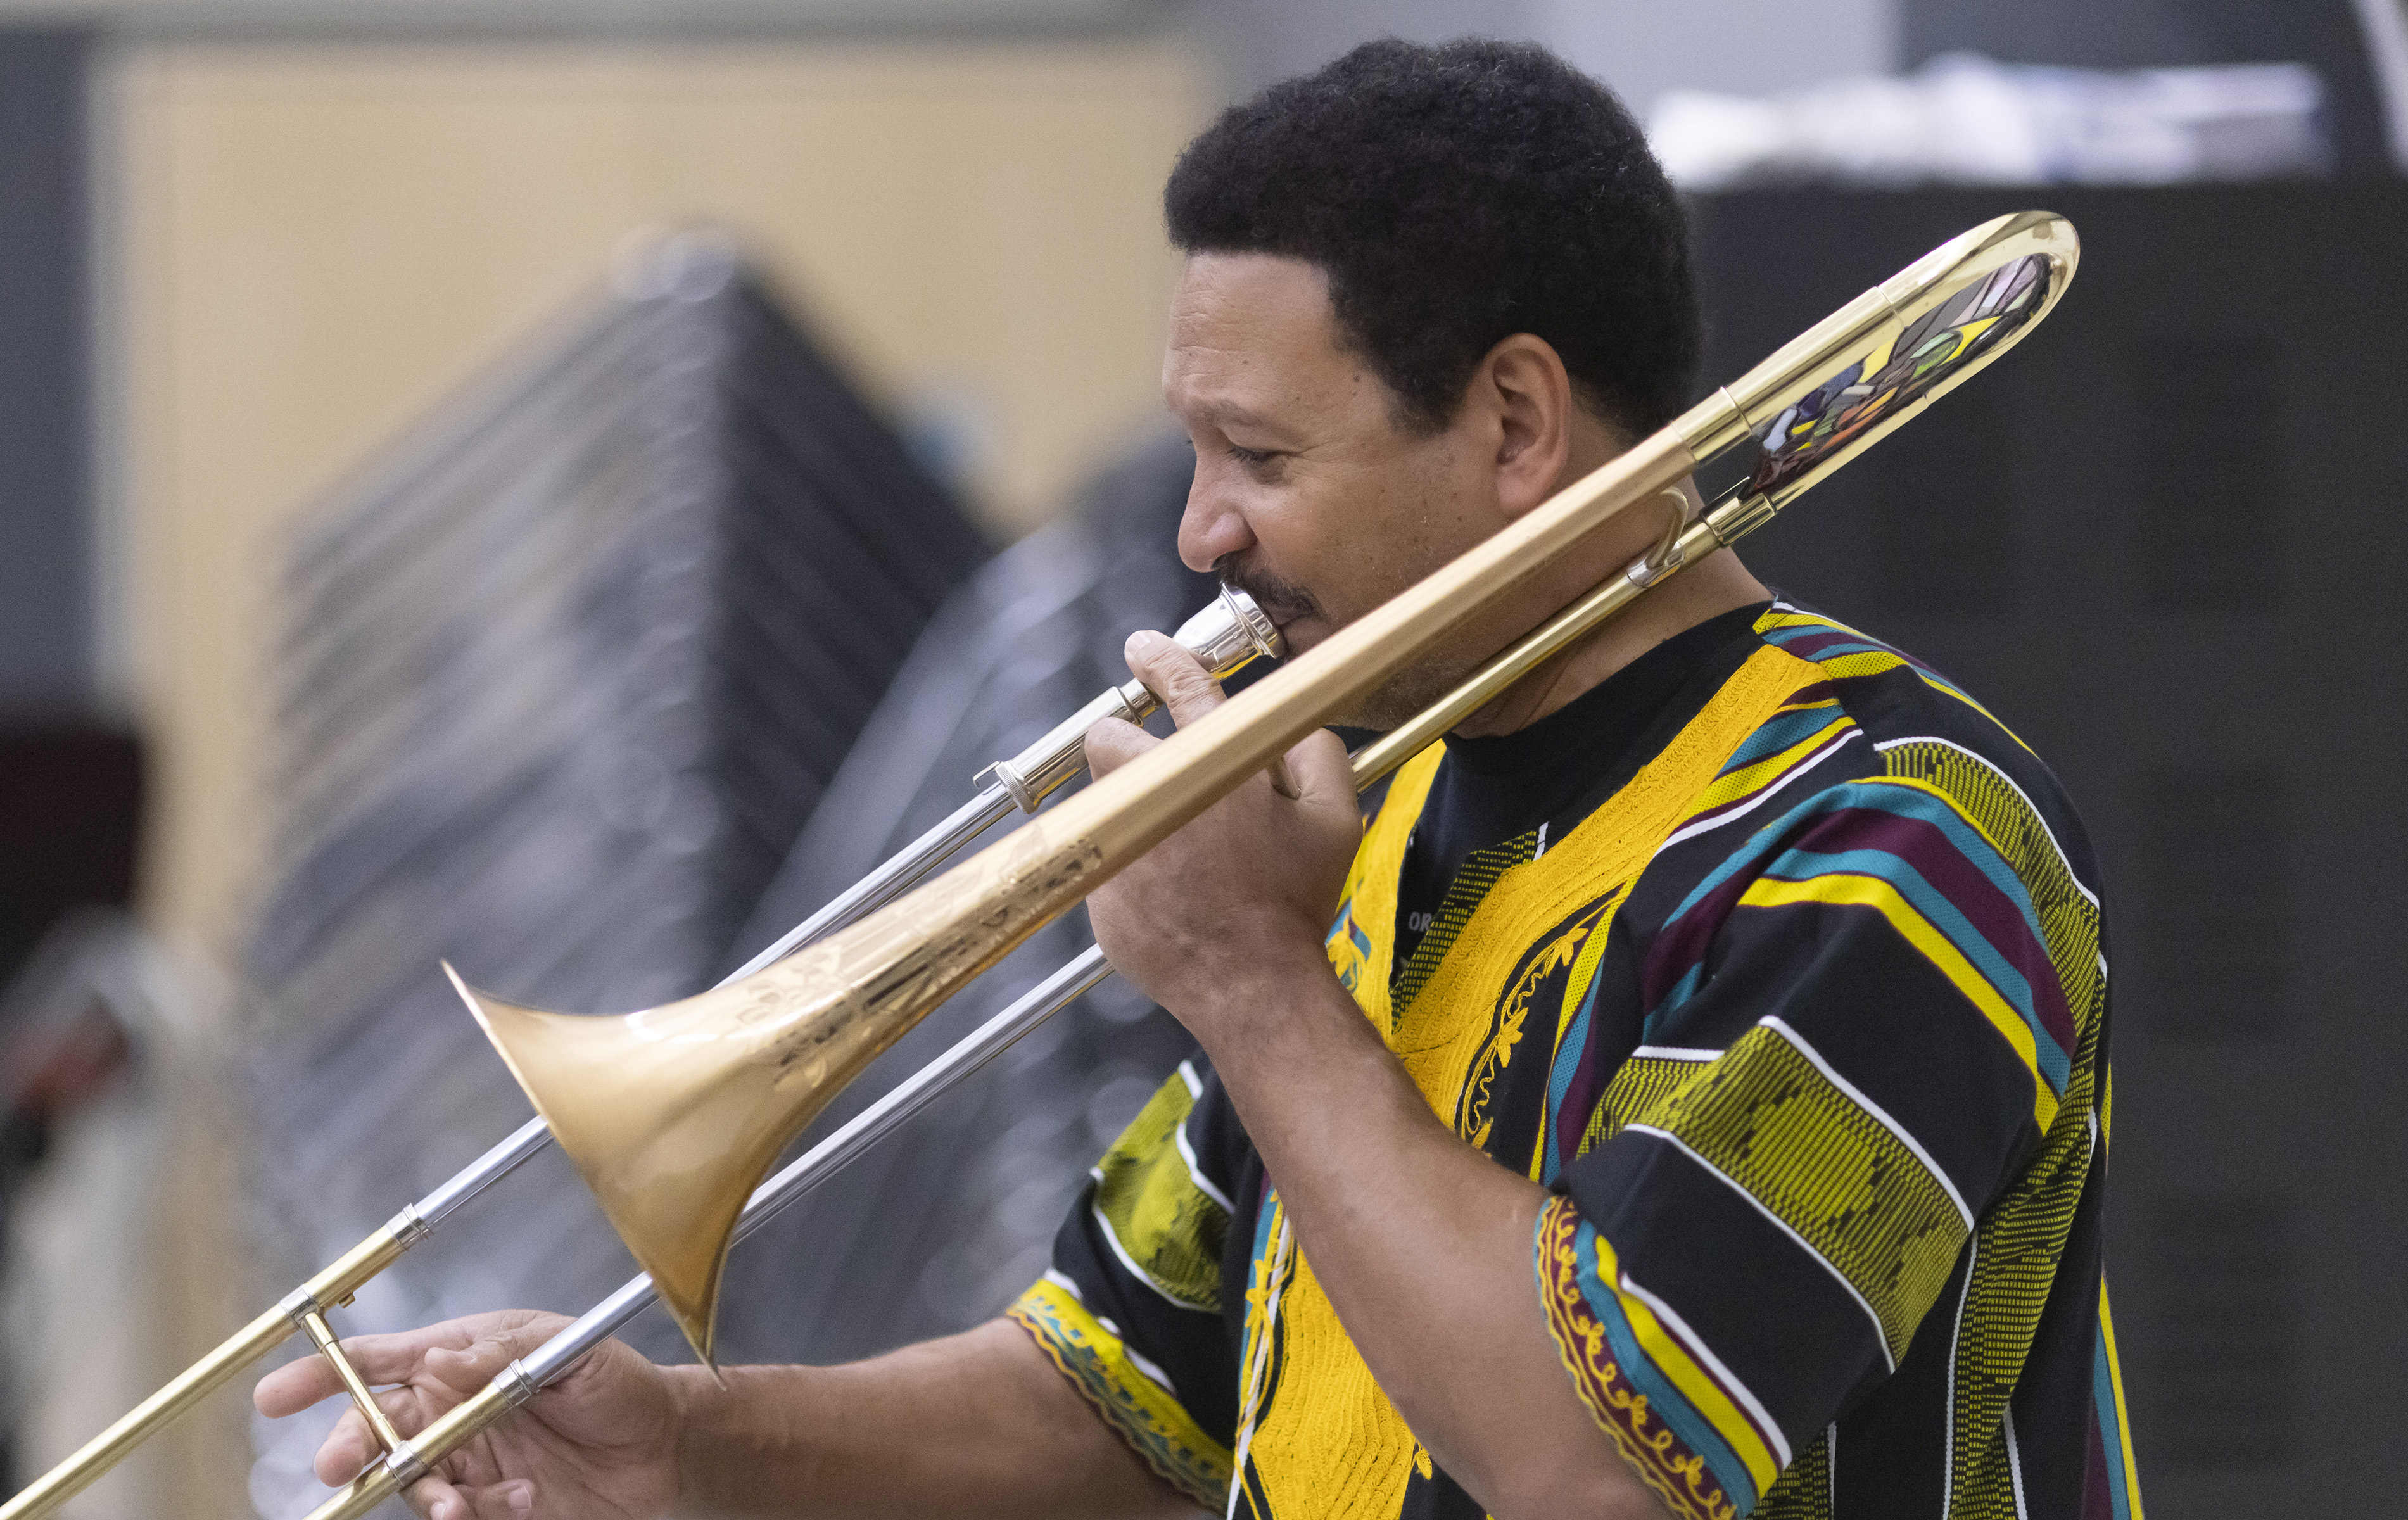 Jazz legend Delfeayo Marsalis plays trombone during rehearsal with the Puget Sound Jazz Orchestra